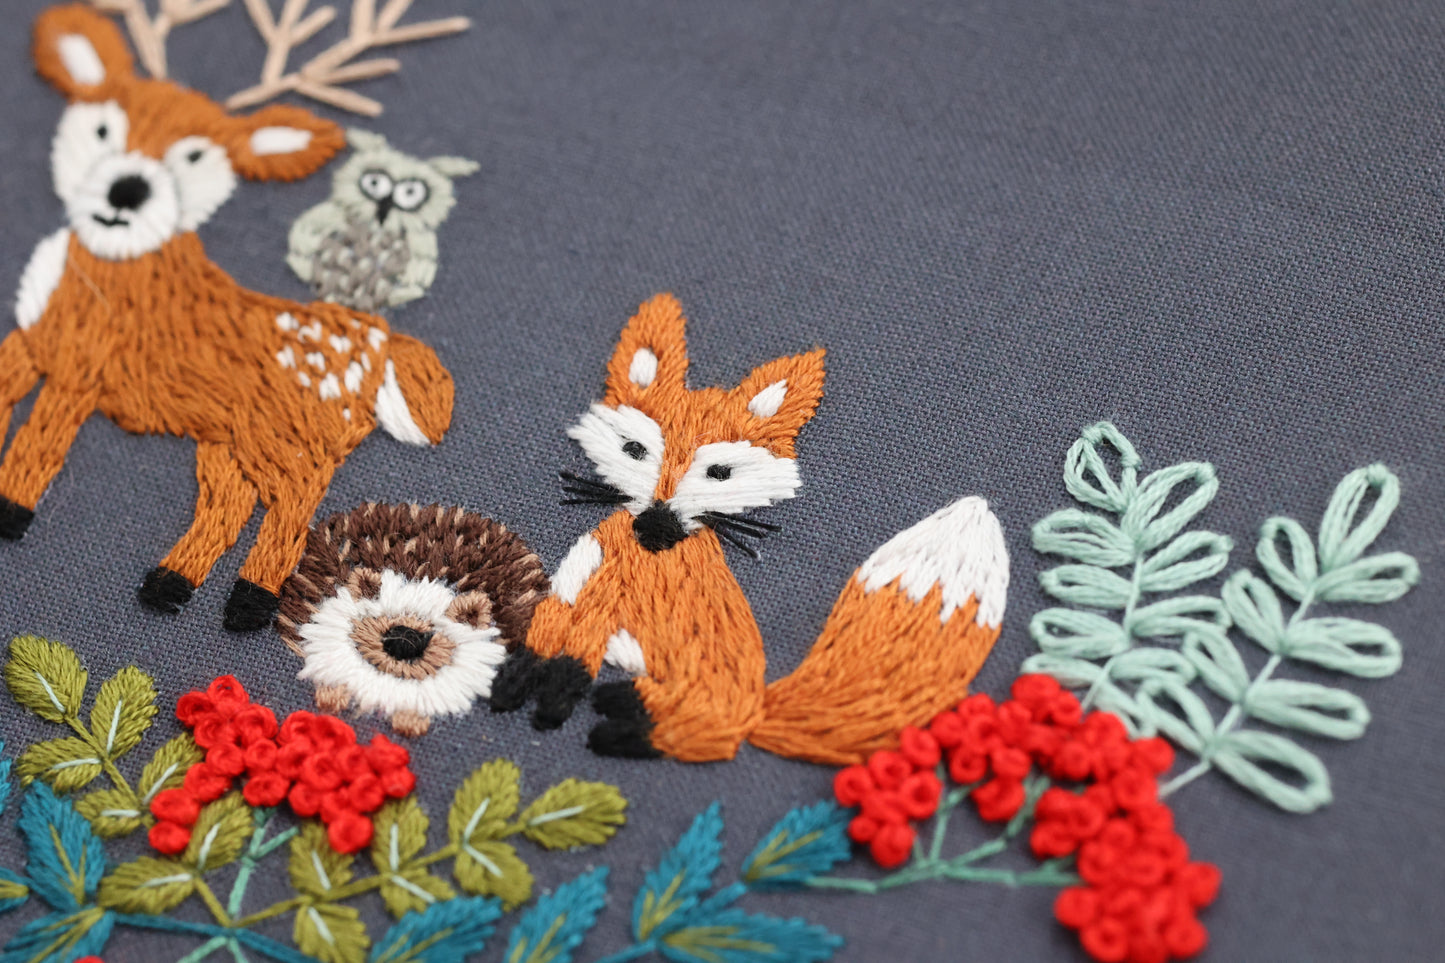 Hand Embroidery Kit - Forest Friends in Navy